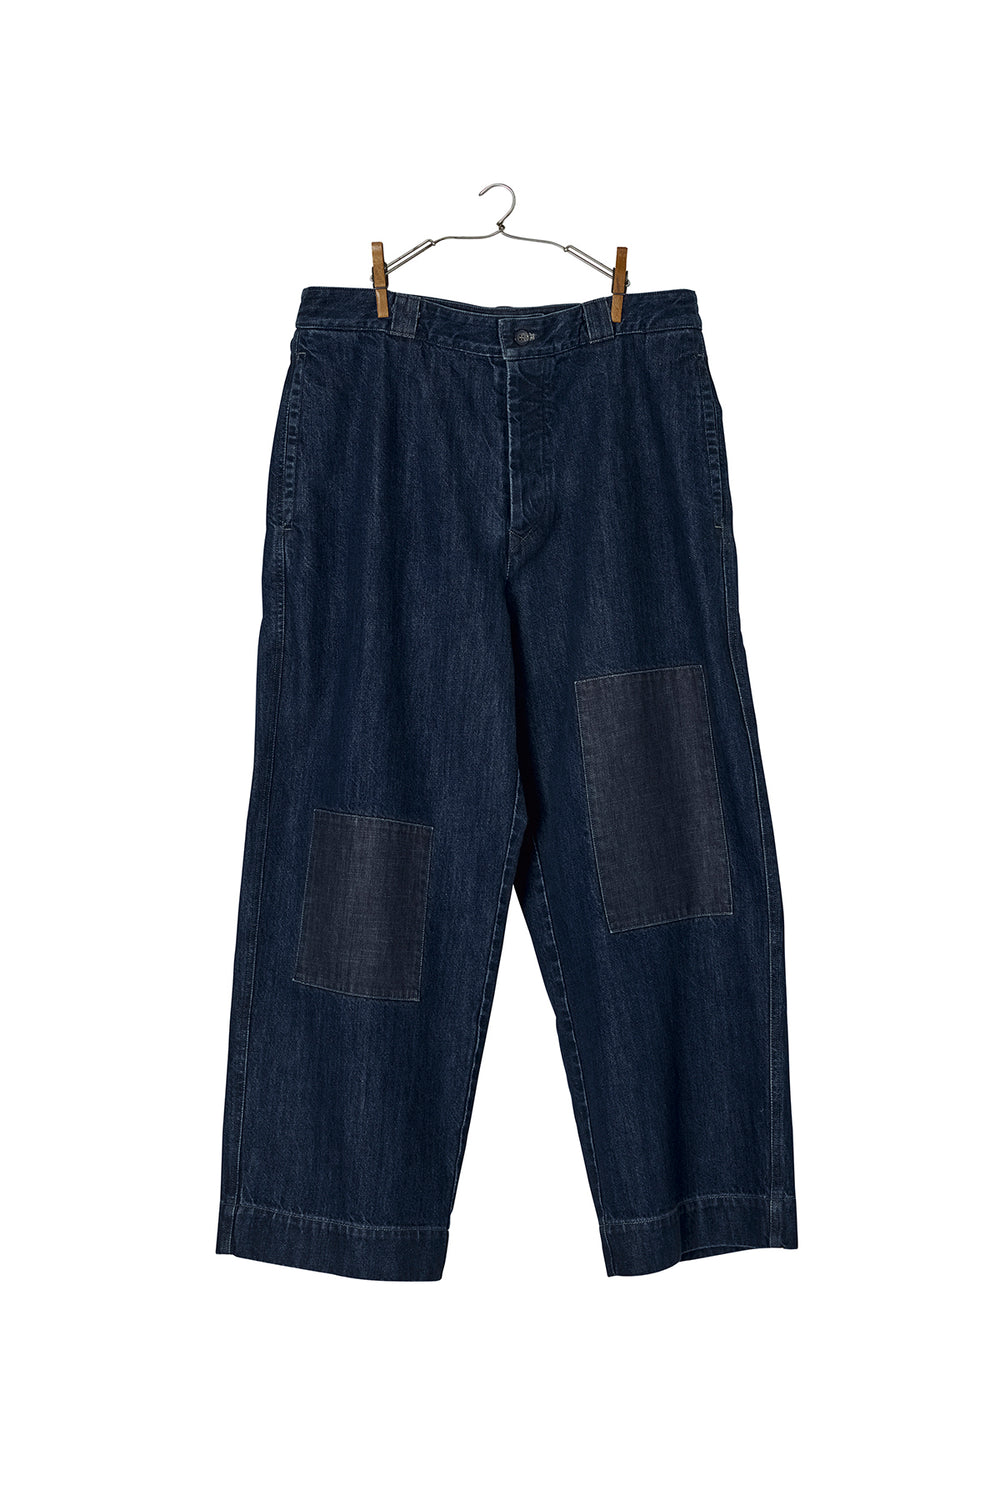 Worker's Trousers